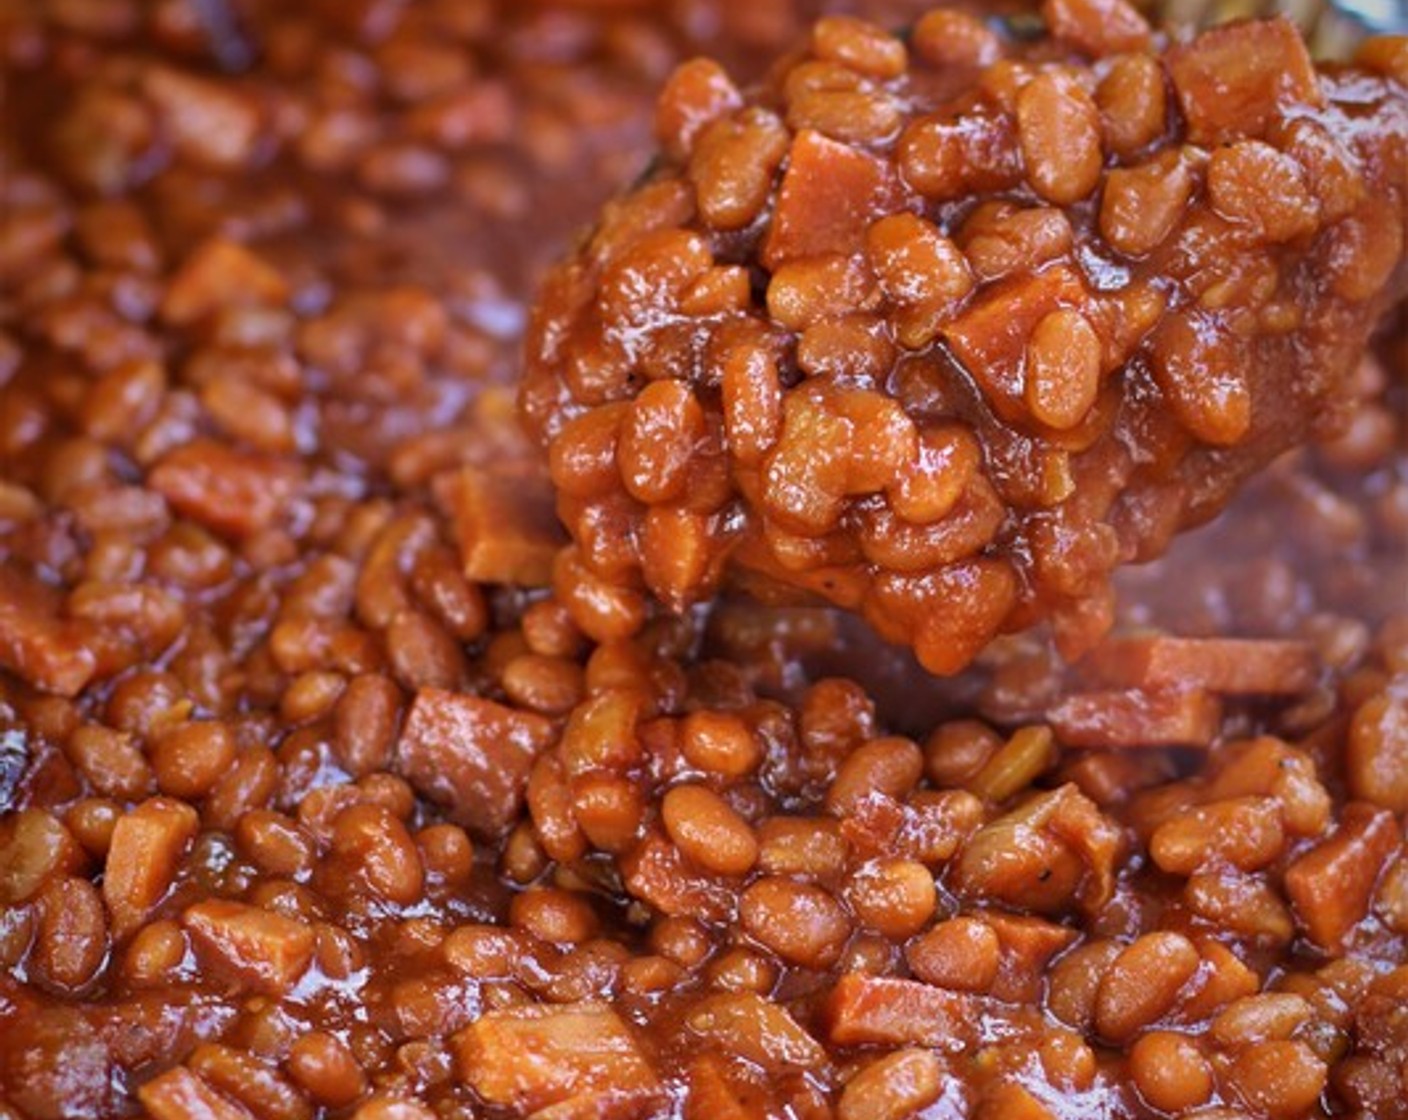 Traeger Smoked Baked Beans